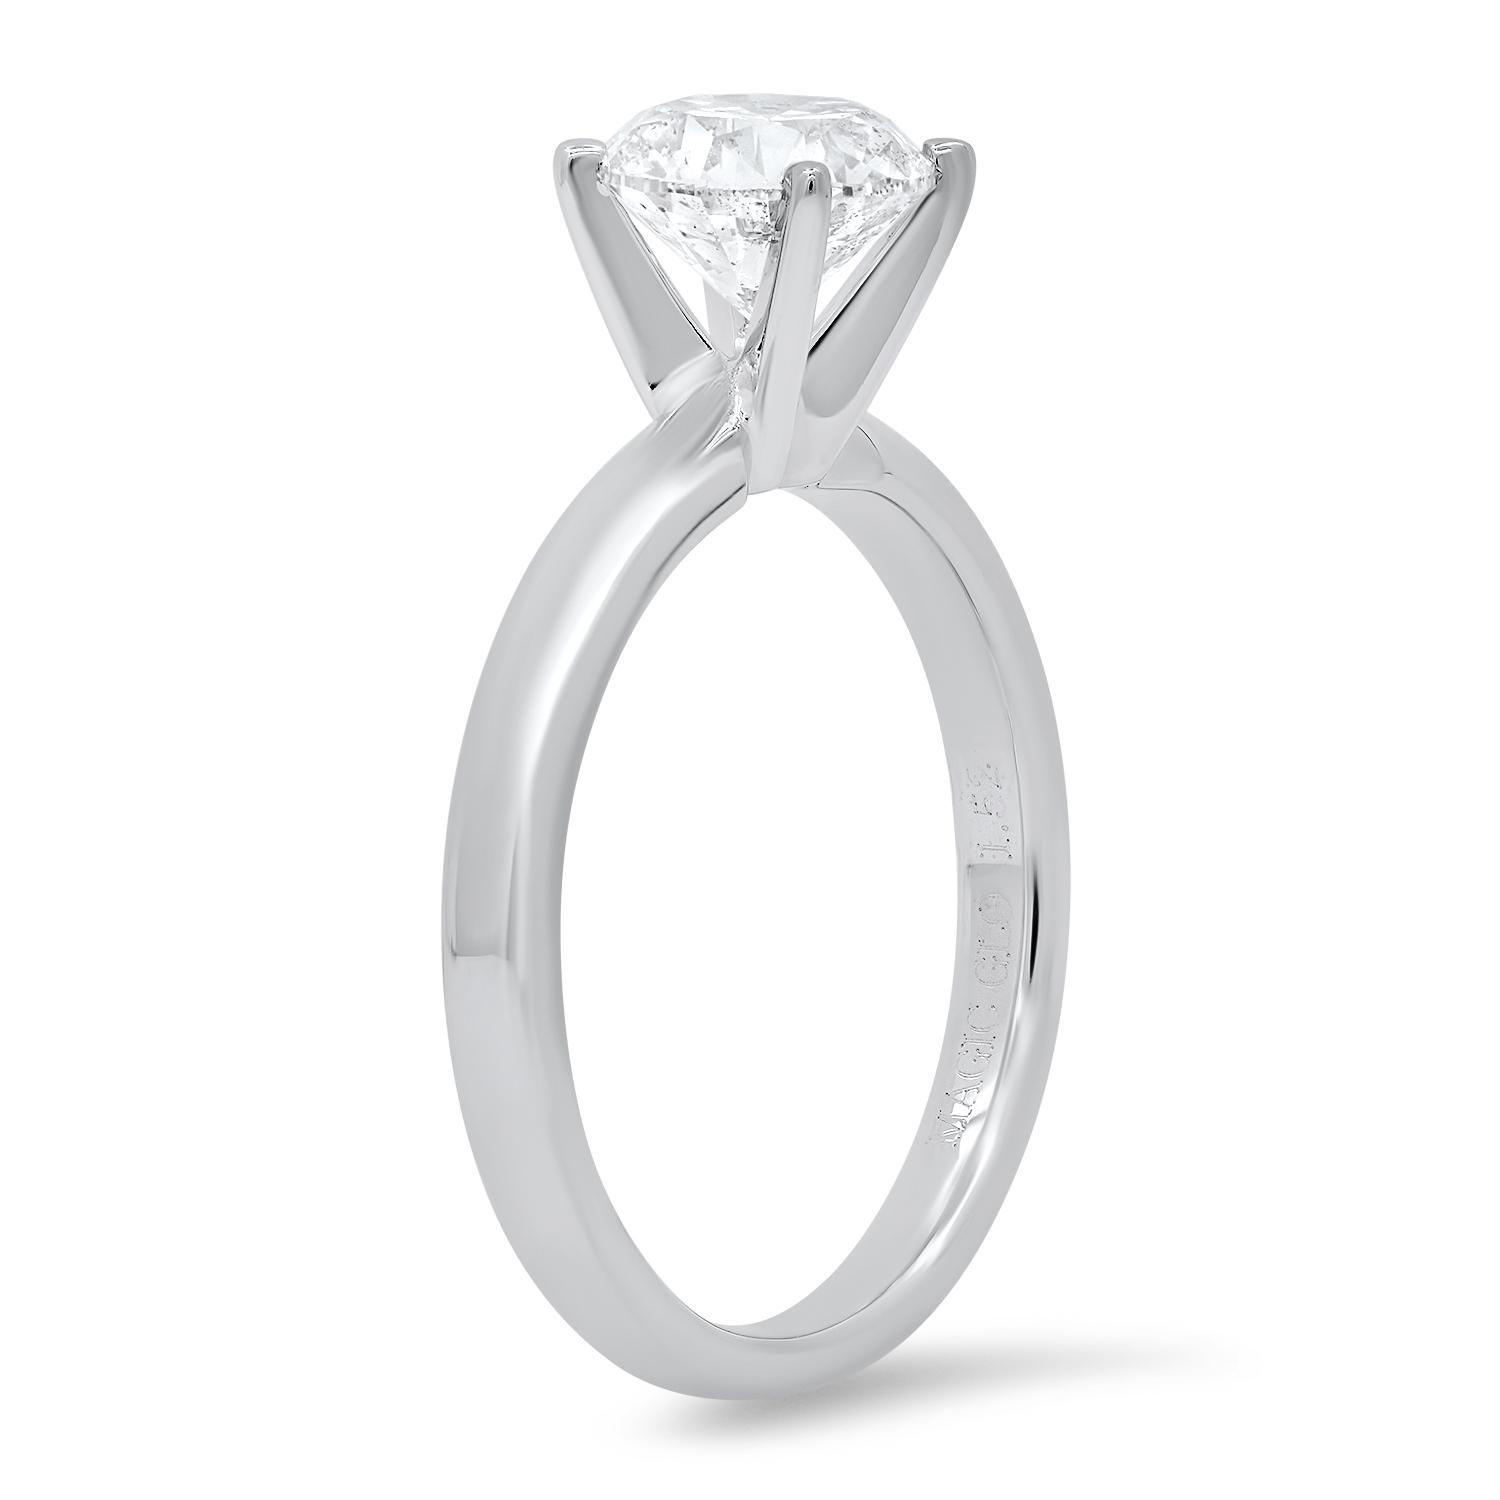 14K White Gold Setting with 1.52ct Diamond Solitaire Ladies Ring